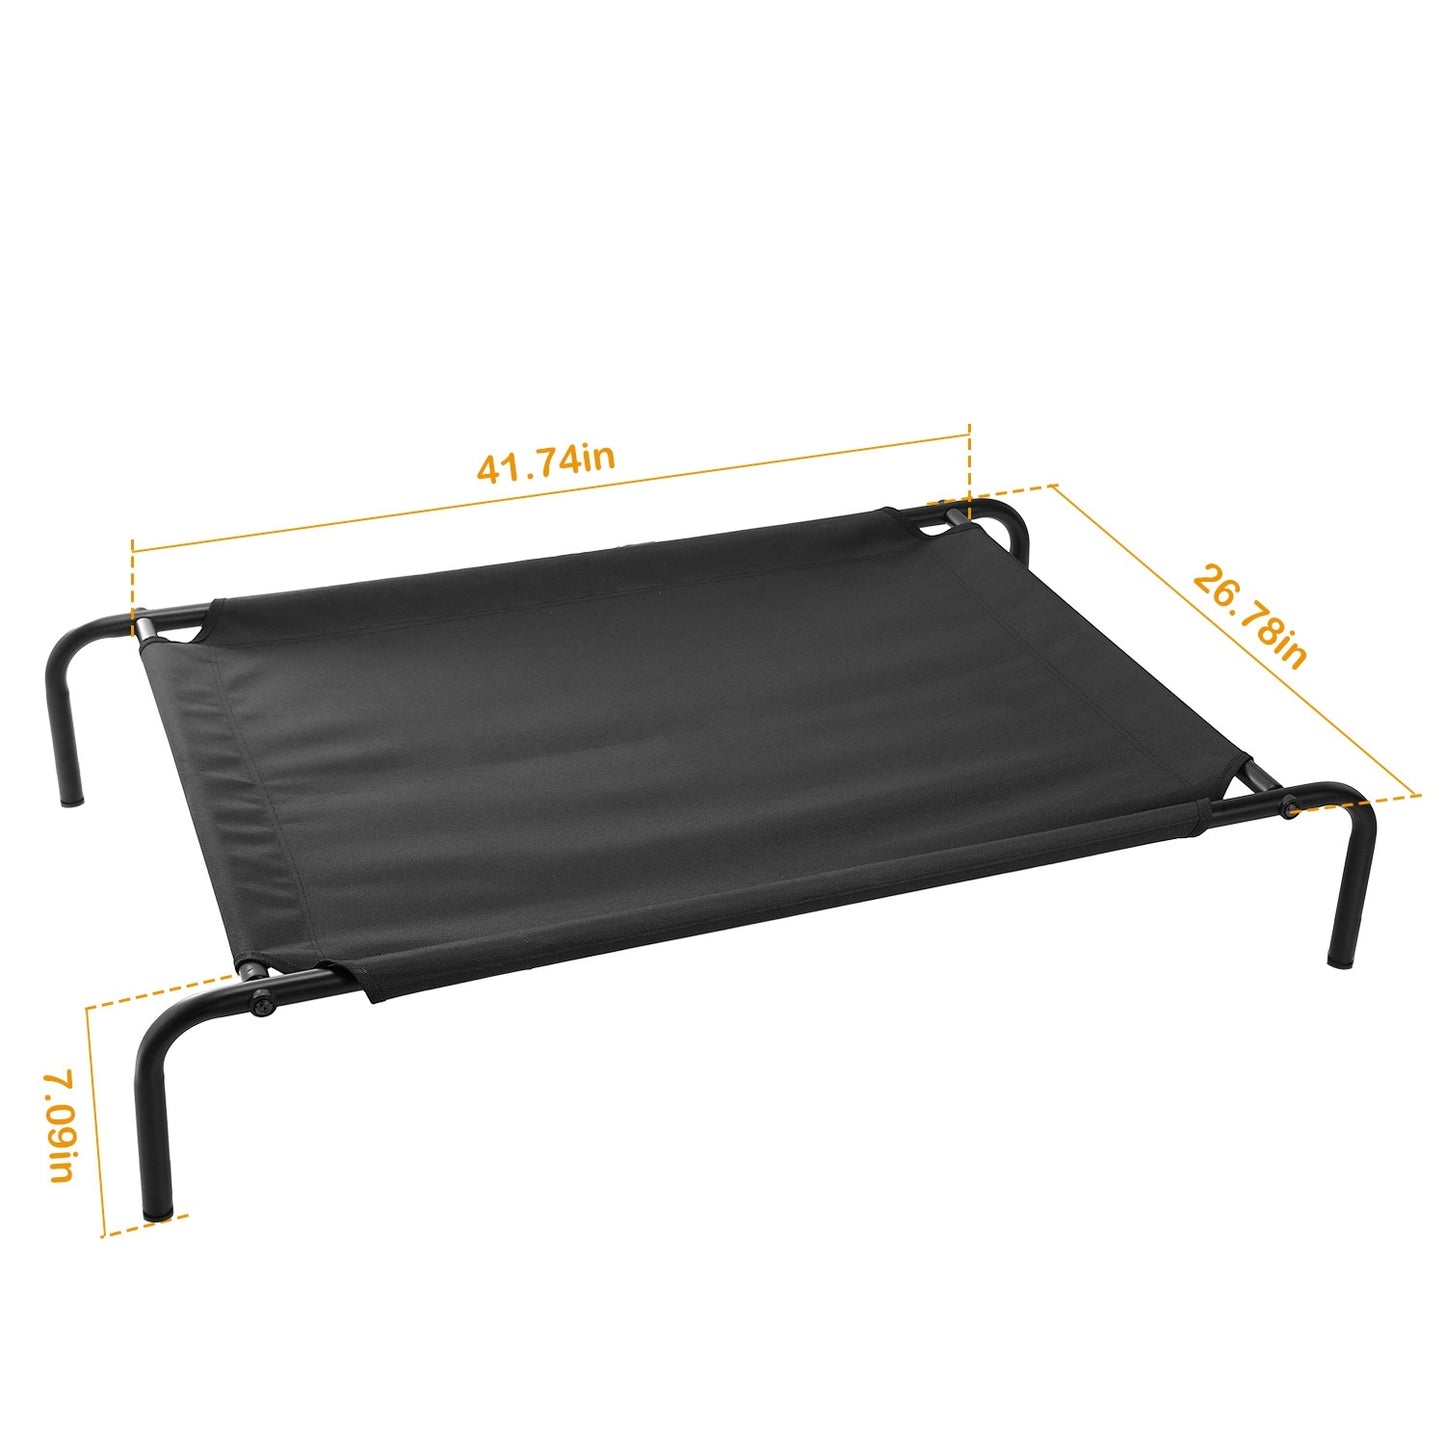 41" Elevated Pet Bed